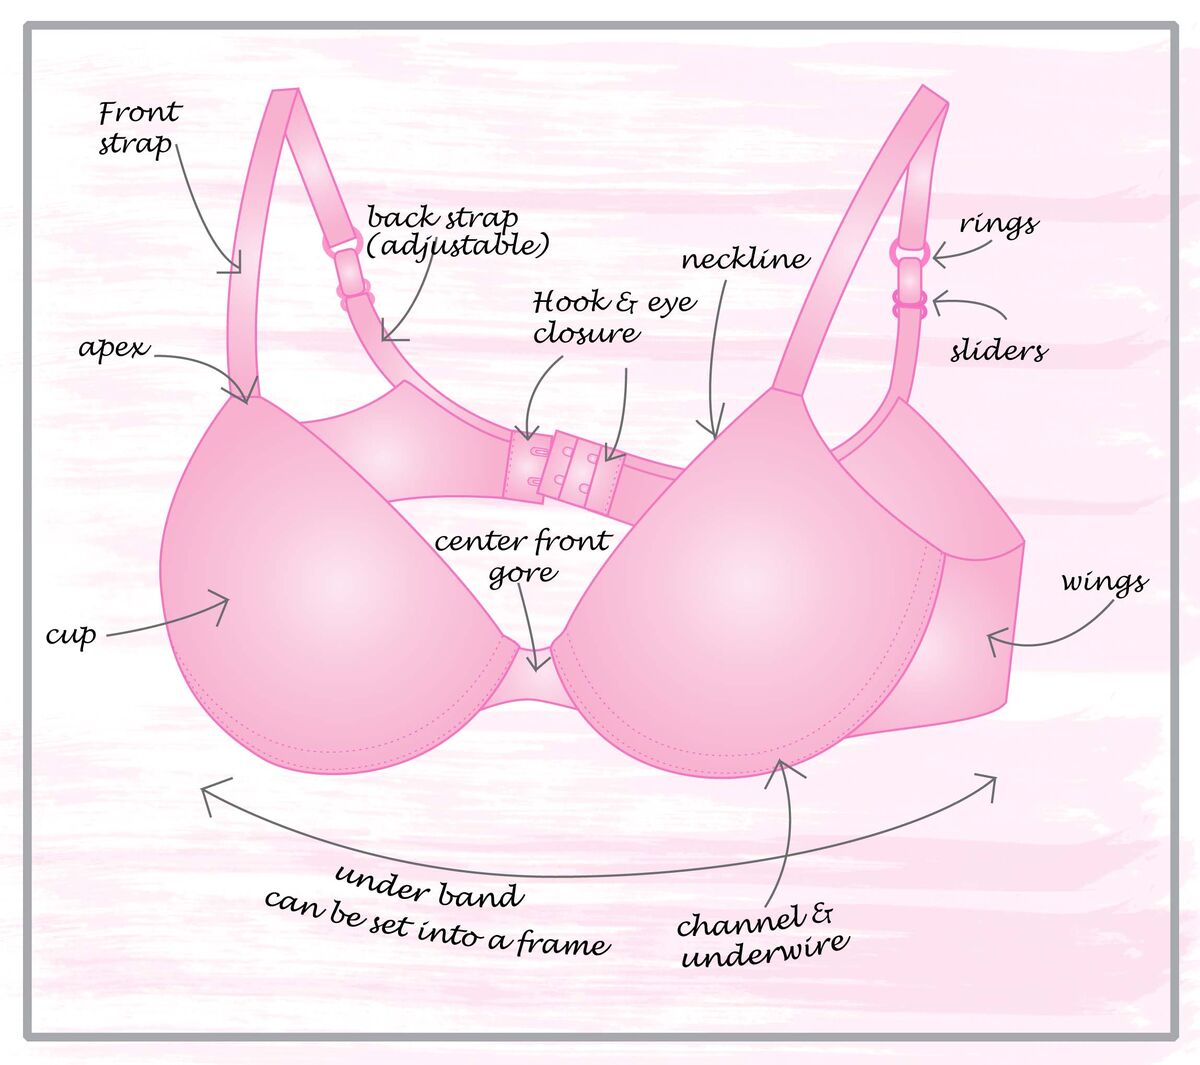 How to Wear a Bra Correctly: Beginners Step-By-Step Guide